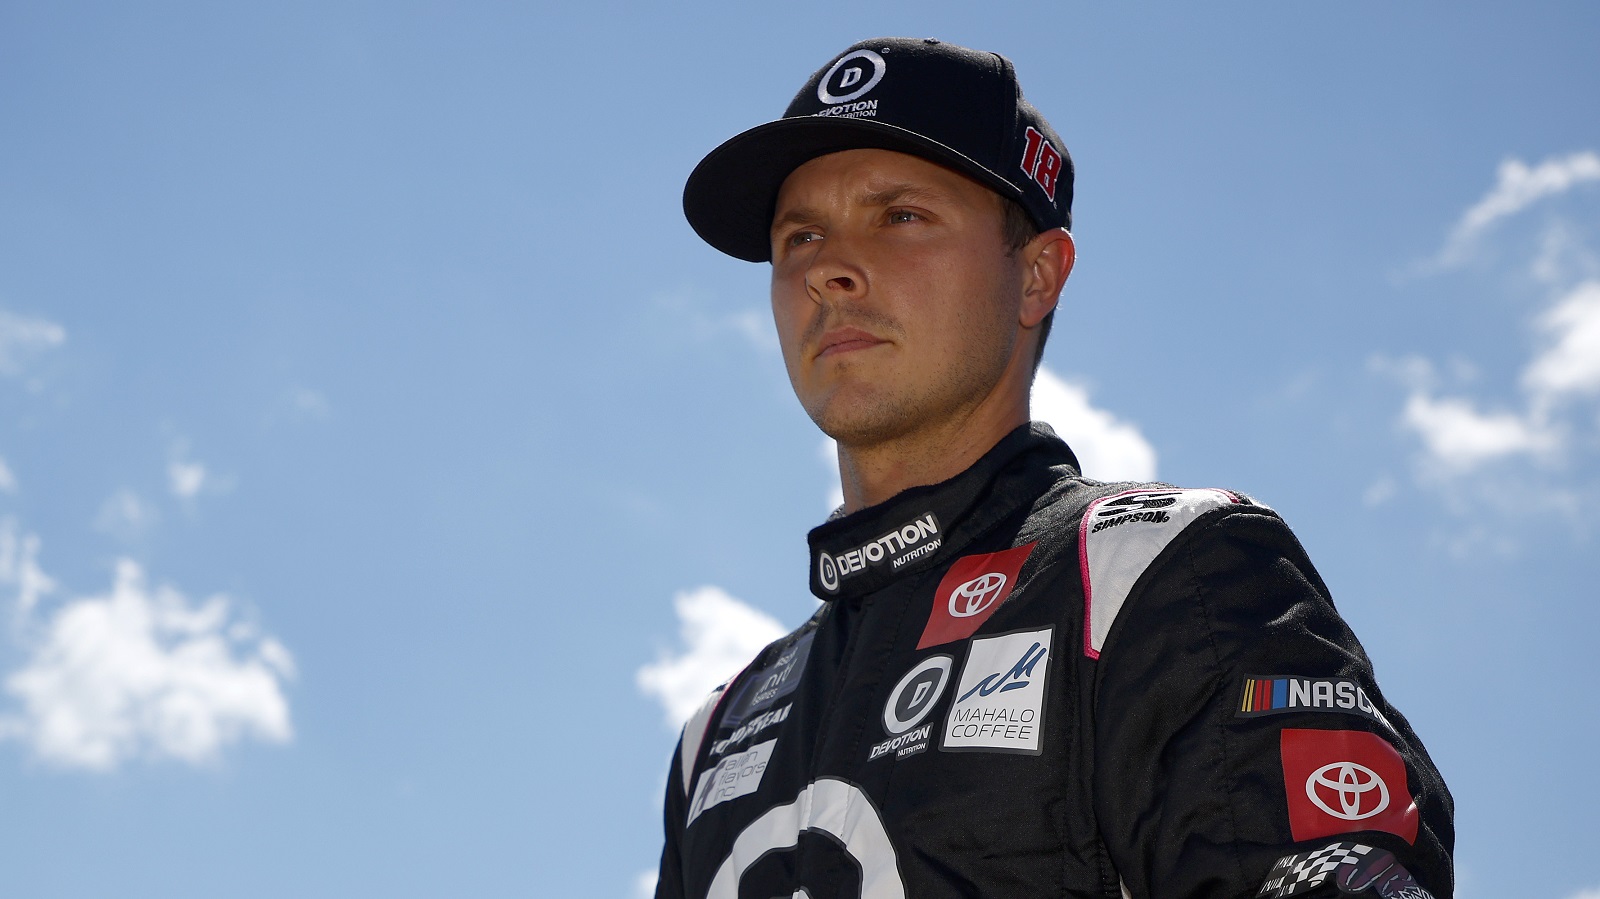 Trevor Bayne looks on during practice for the NASCAR Xfinity Series Alsco Uniforms 300 at Charlotte Motor Speedway on May 27, 2022.